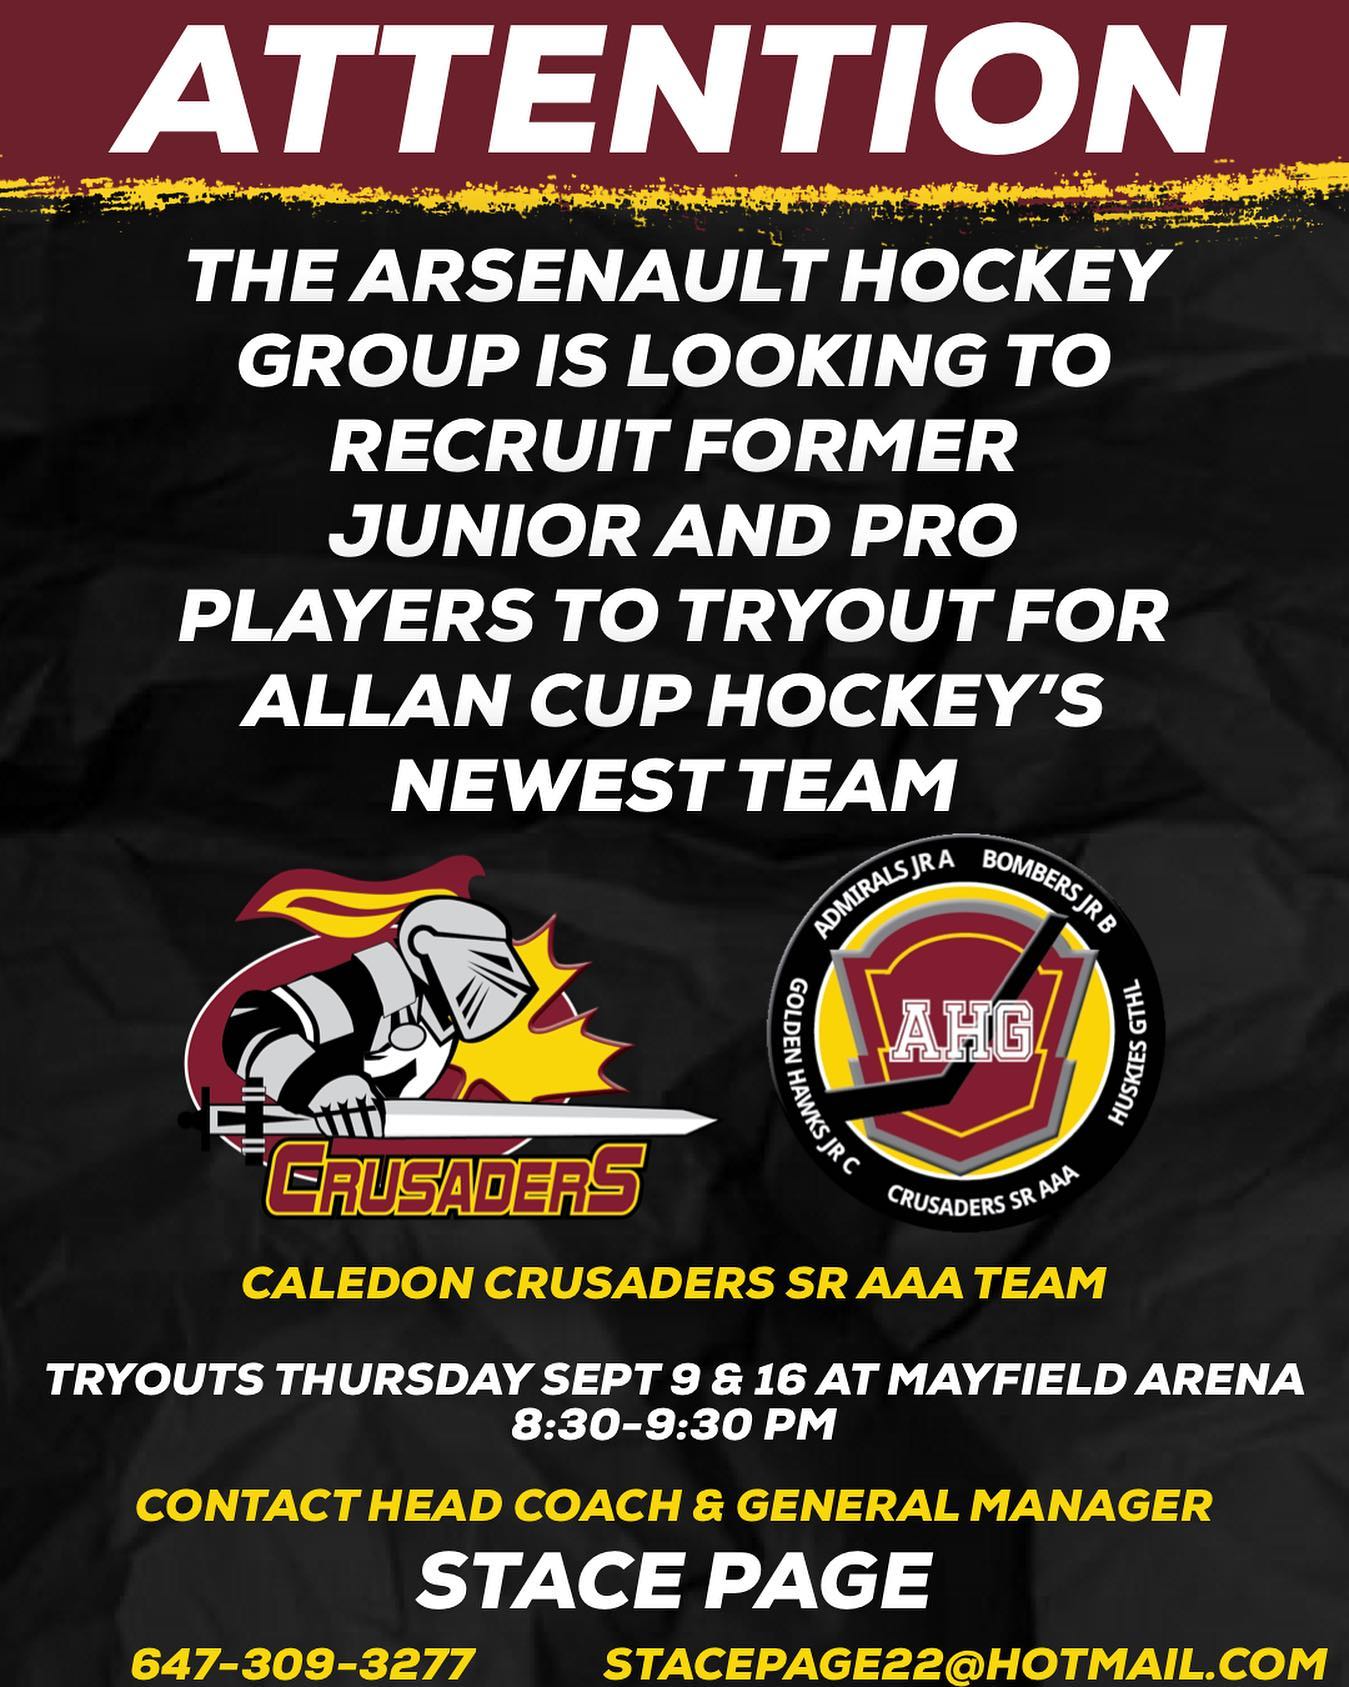 🚨ATTENTION🚨

The Arsenault Hockey Group are looking to recruit former junior and pro hockey players to tryout for Allan Cup Hockey’s newest SR AAA team, the Caledon Crusaders!

Contact Head Coach and General Manager, Stace Page for all details regarding tryouts.

Tryouts at Mayfield Arena:
Thursday, September 9th, 8:30-9:30 PM
Thursday, September 16th, 8:30-9:30 PM